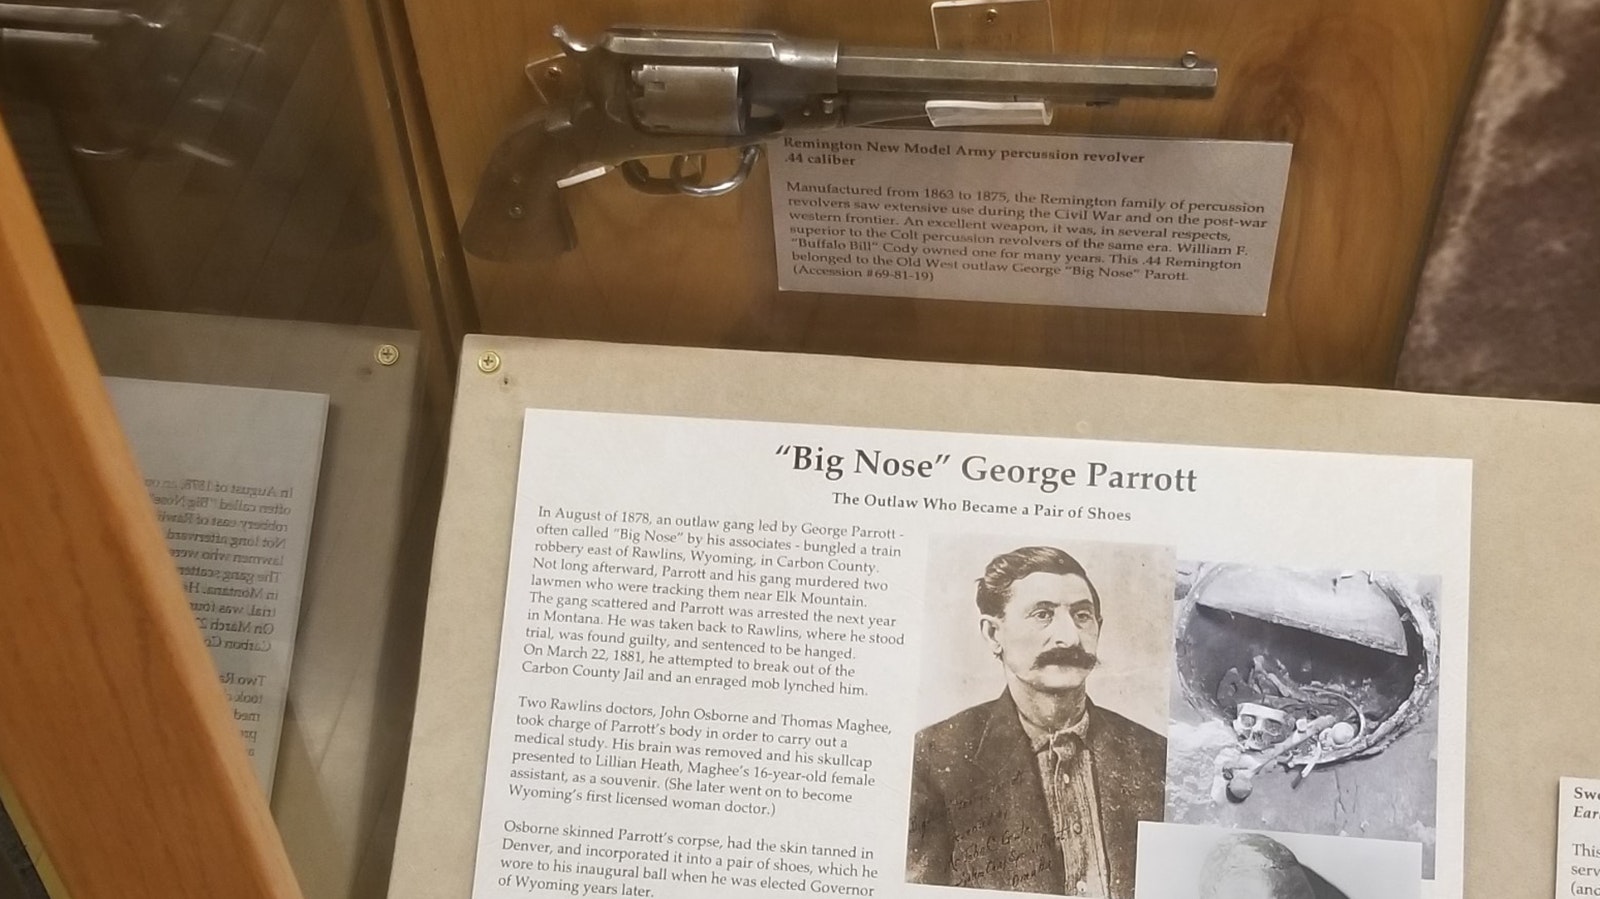 The gun "Big Nose" George Parrott may have used to kill two Wyoming law enforcement officers.